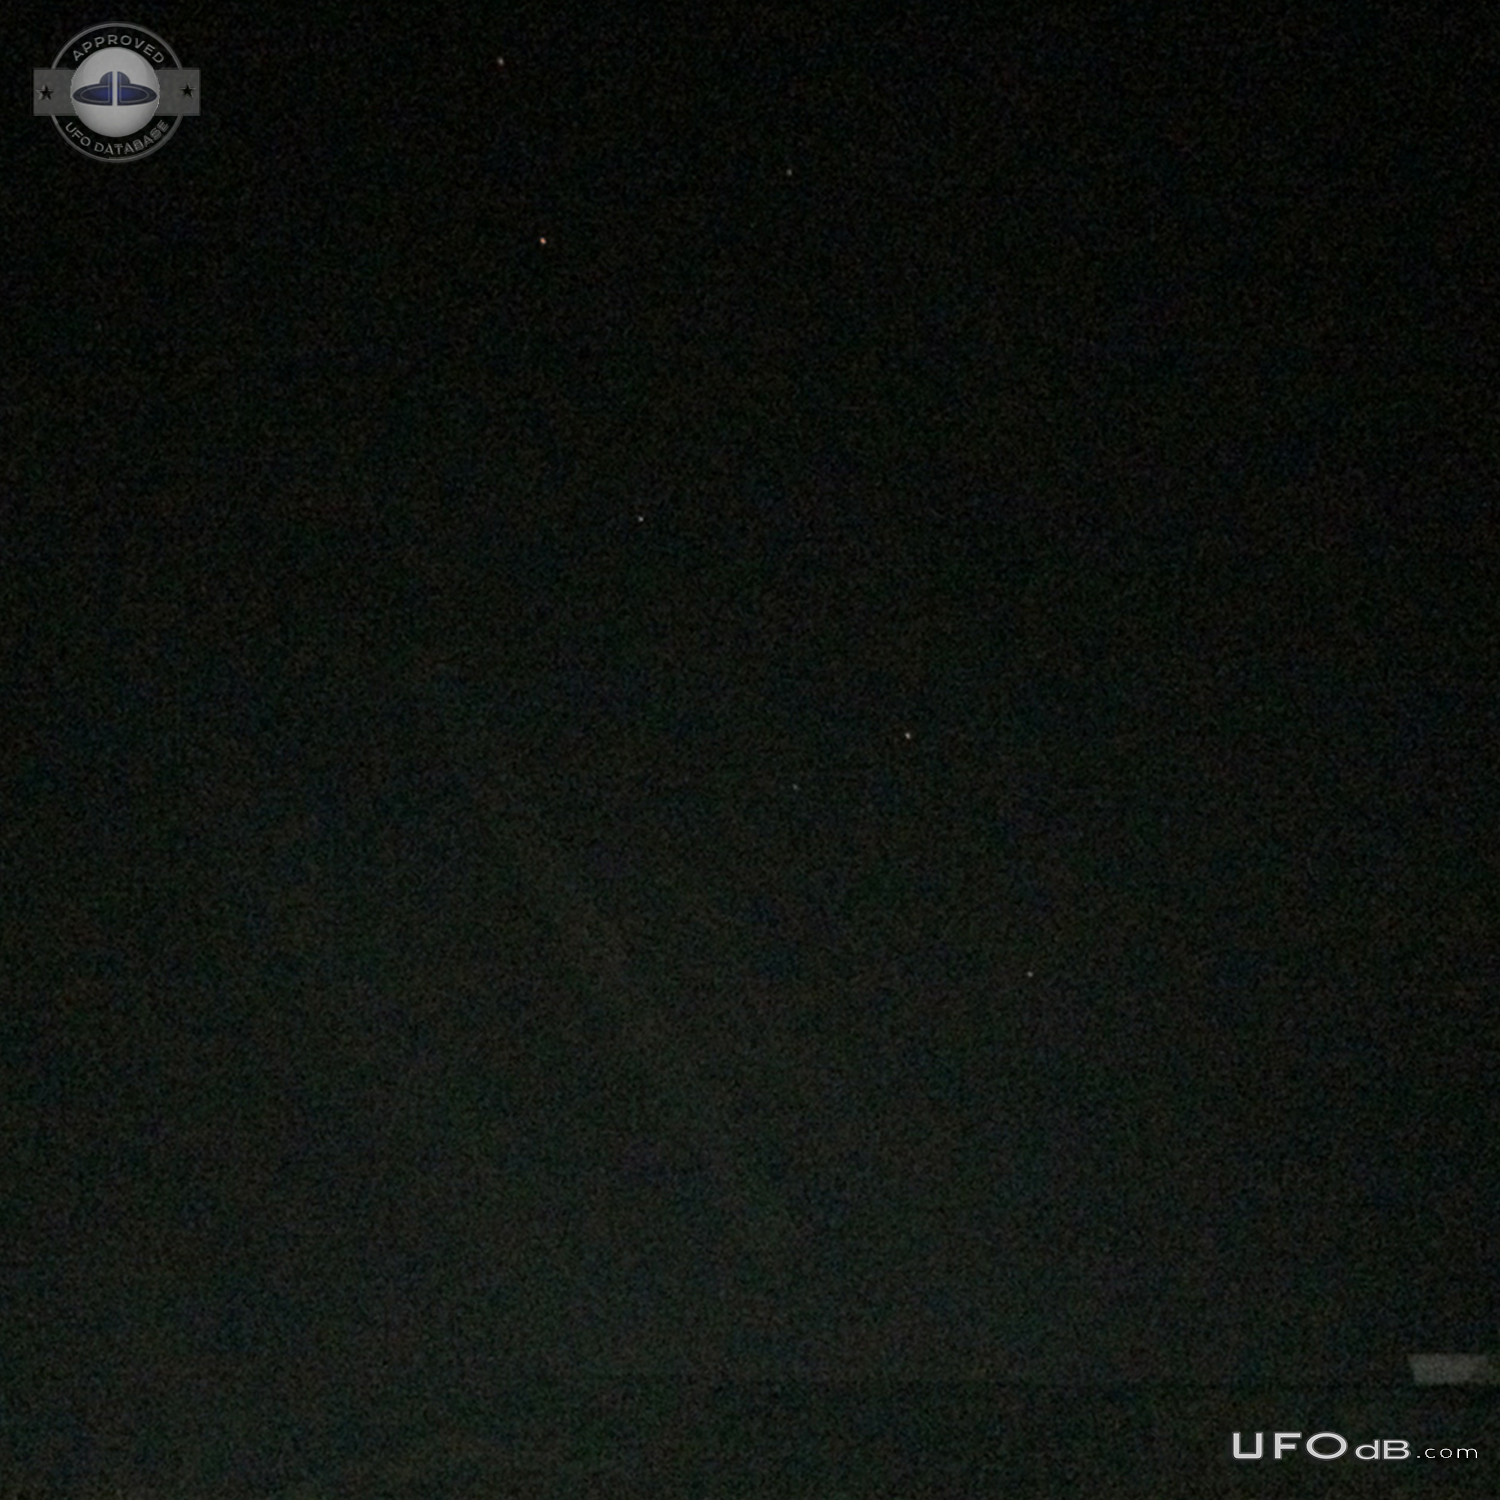 7 red star like UFO ascended above cloud - Cambodia 2015 UFO Picture #676-2